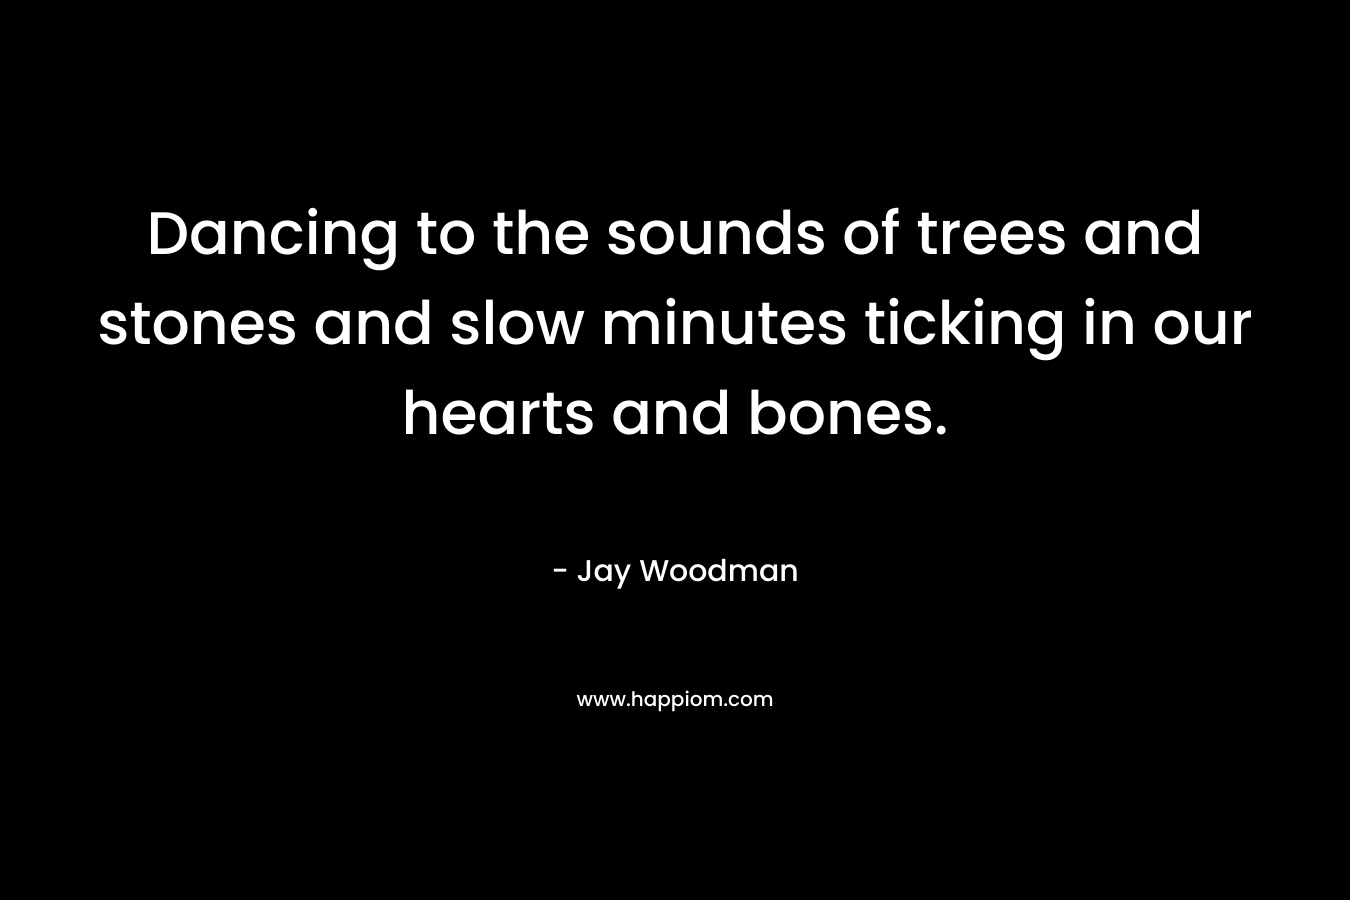 Dancing to the sounds of trees and stones and slow minutes ticking in our hearts and bones. – Jay Woodman